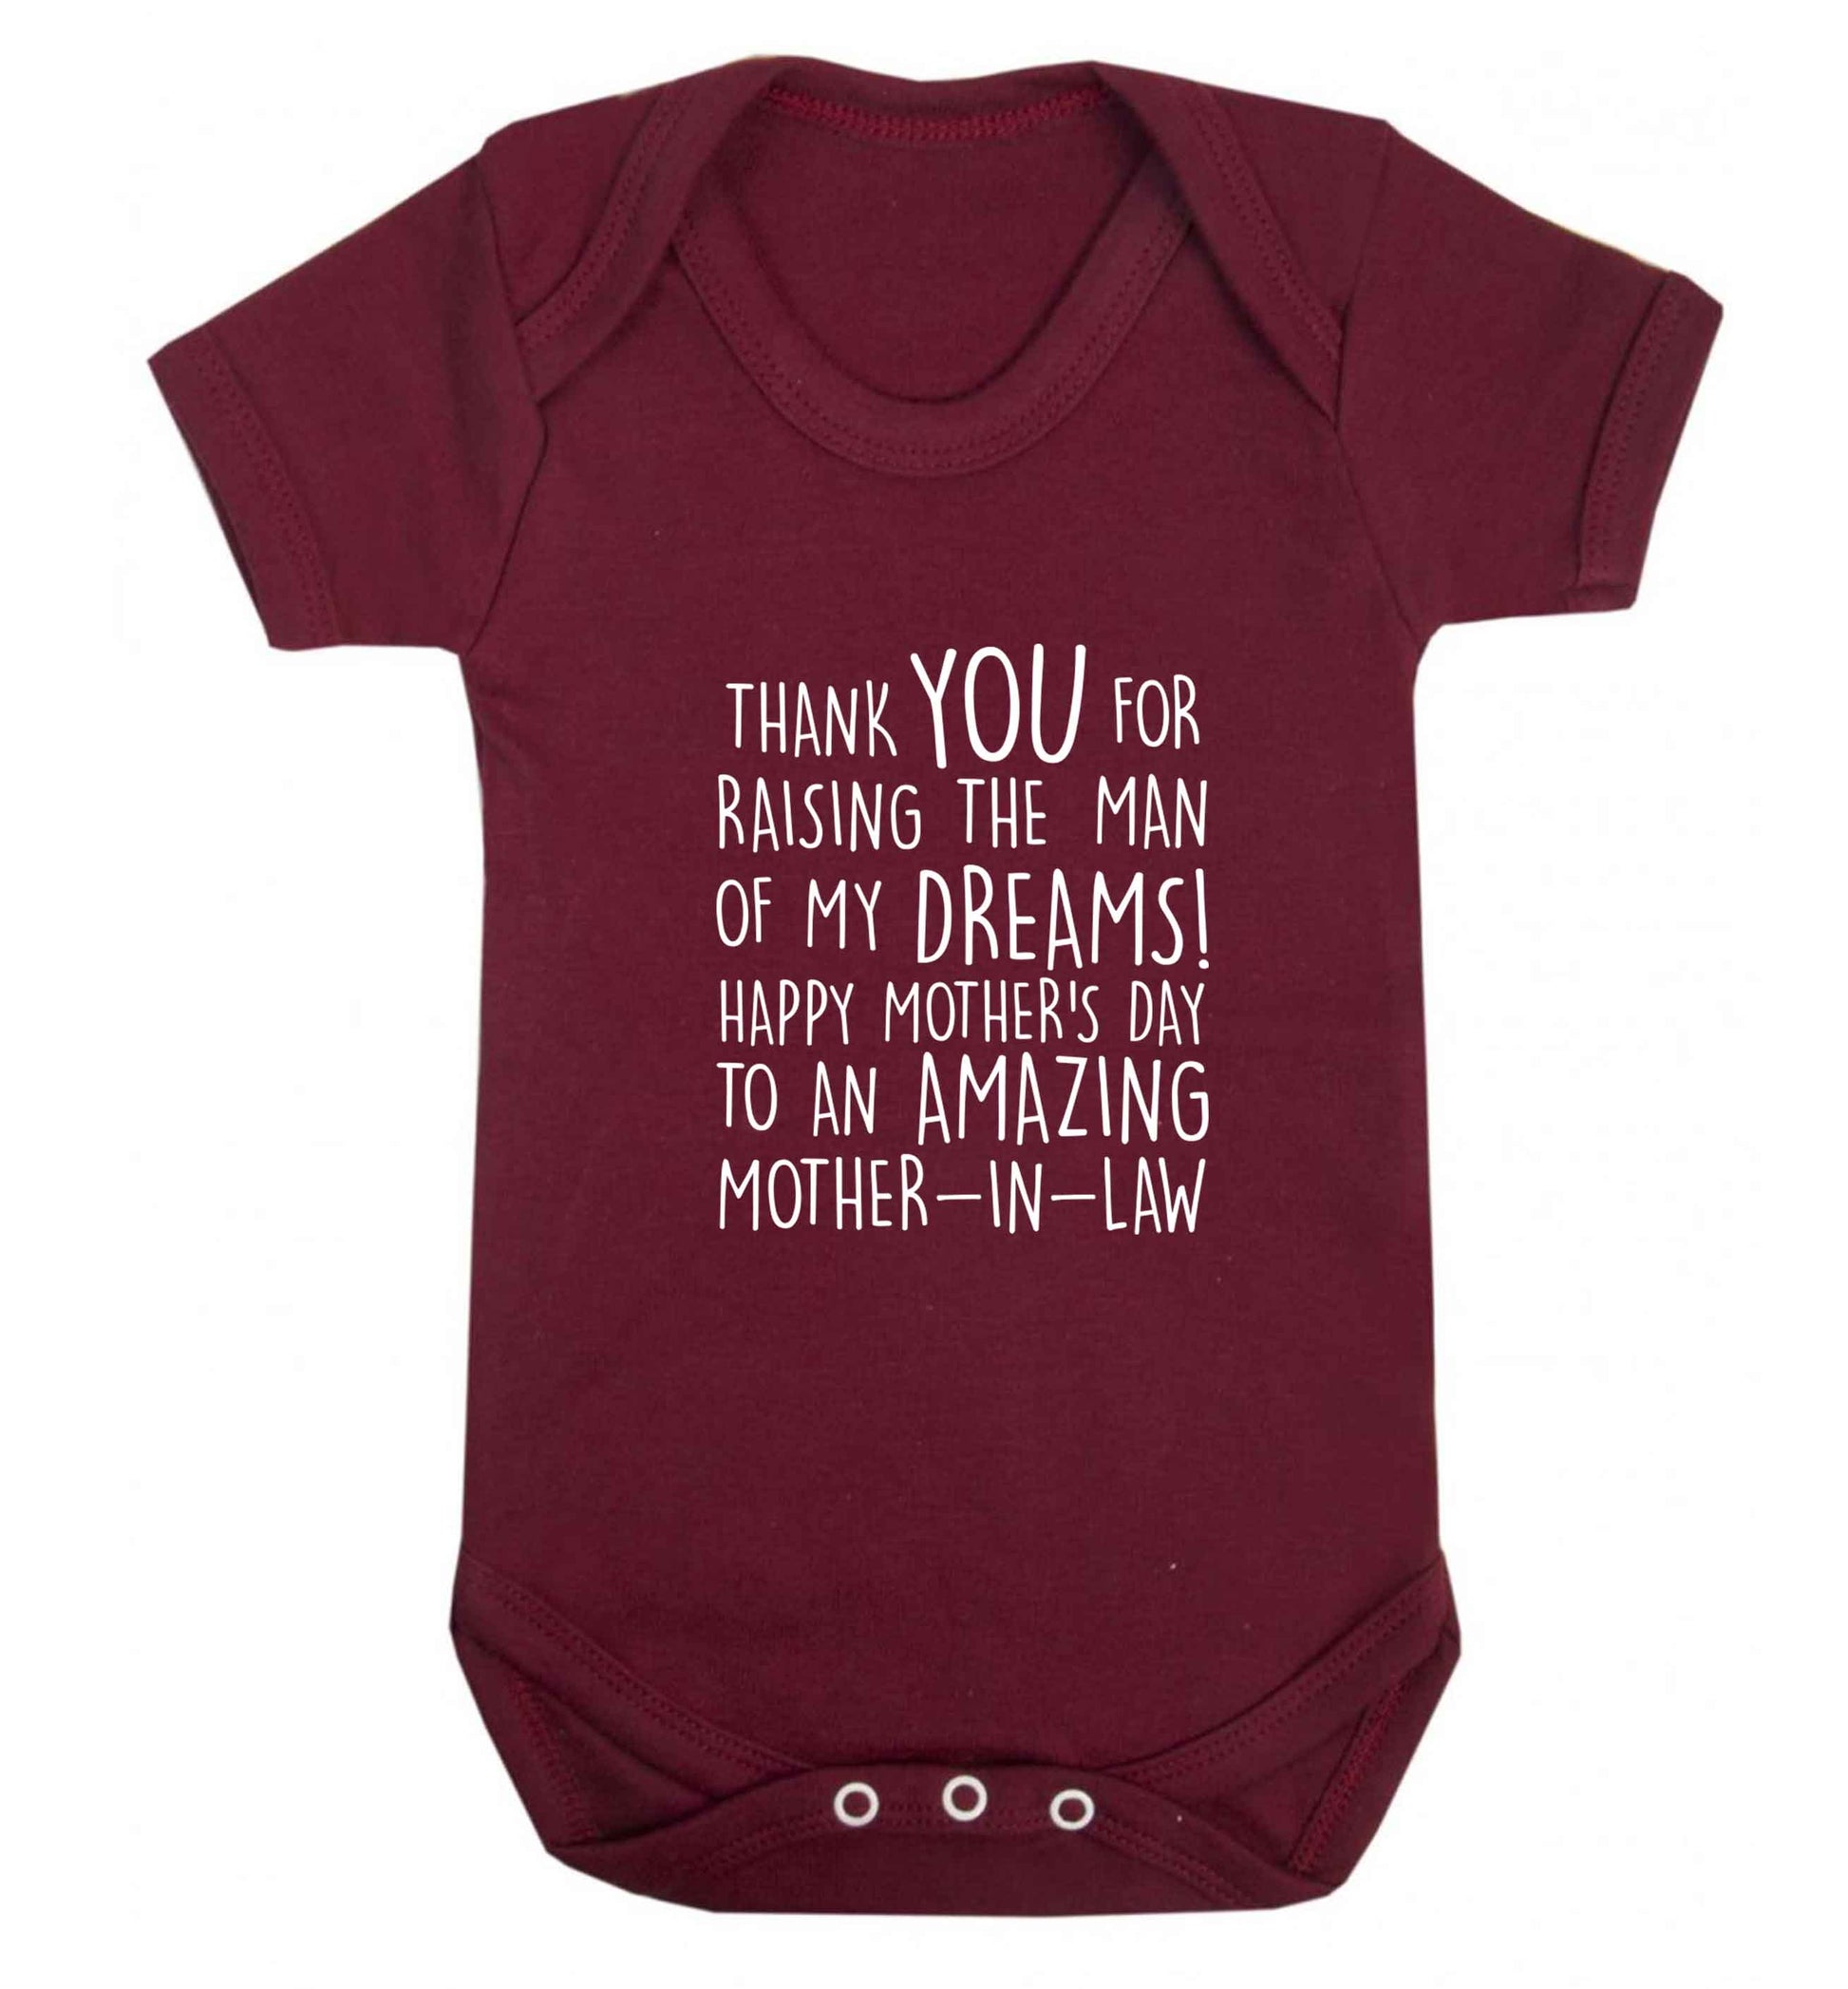 Raising the man of my dreams mother's day mother-in-law baby vest maroon 18-24 months